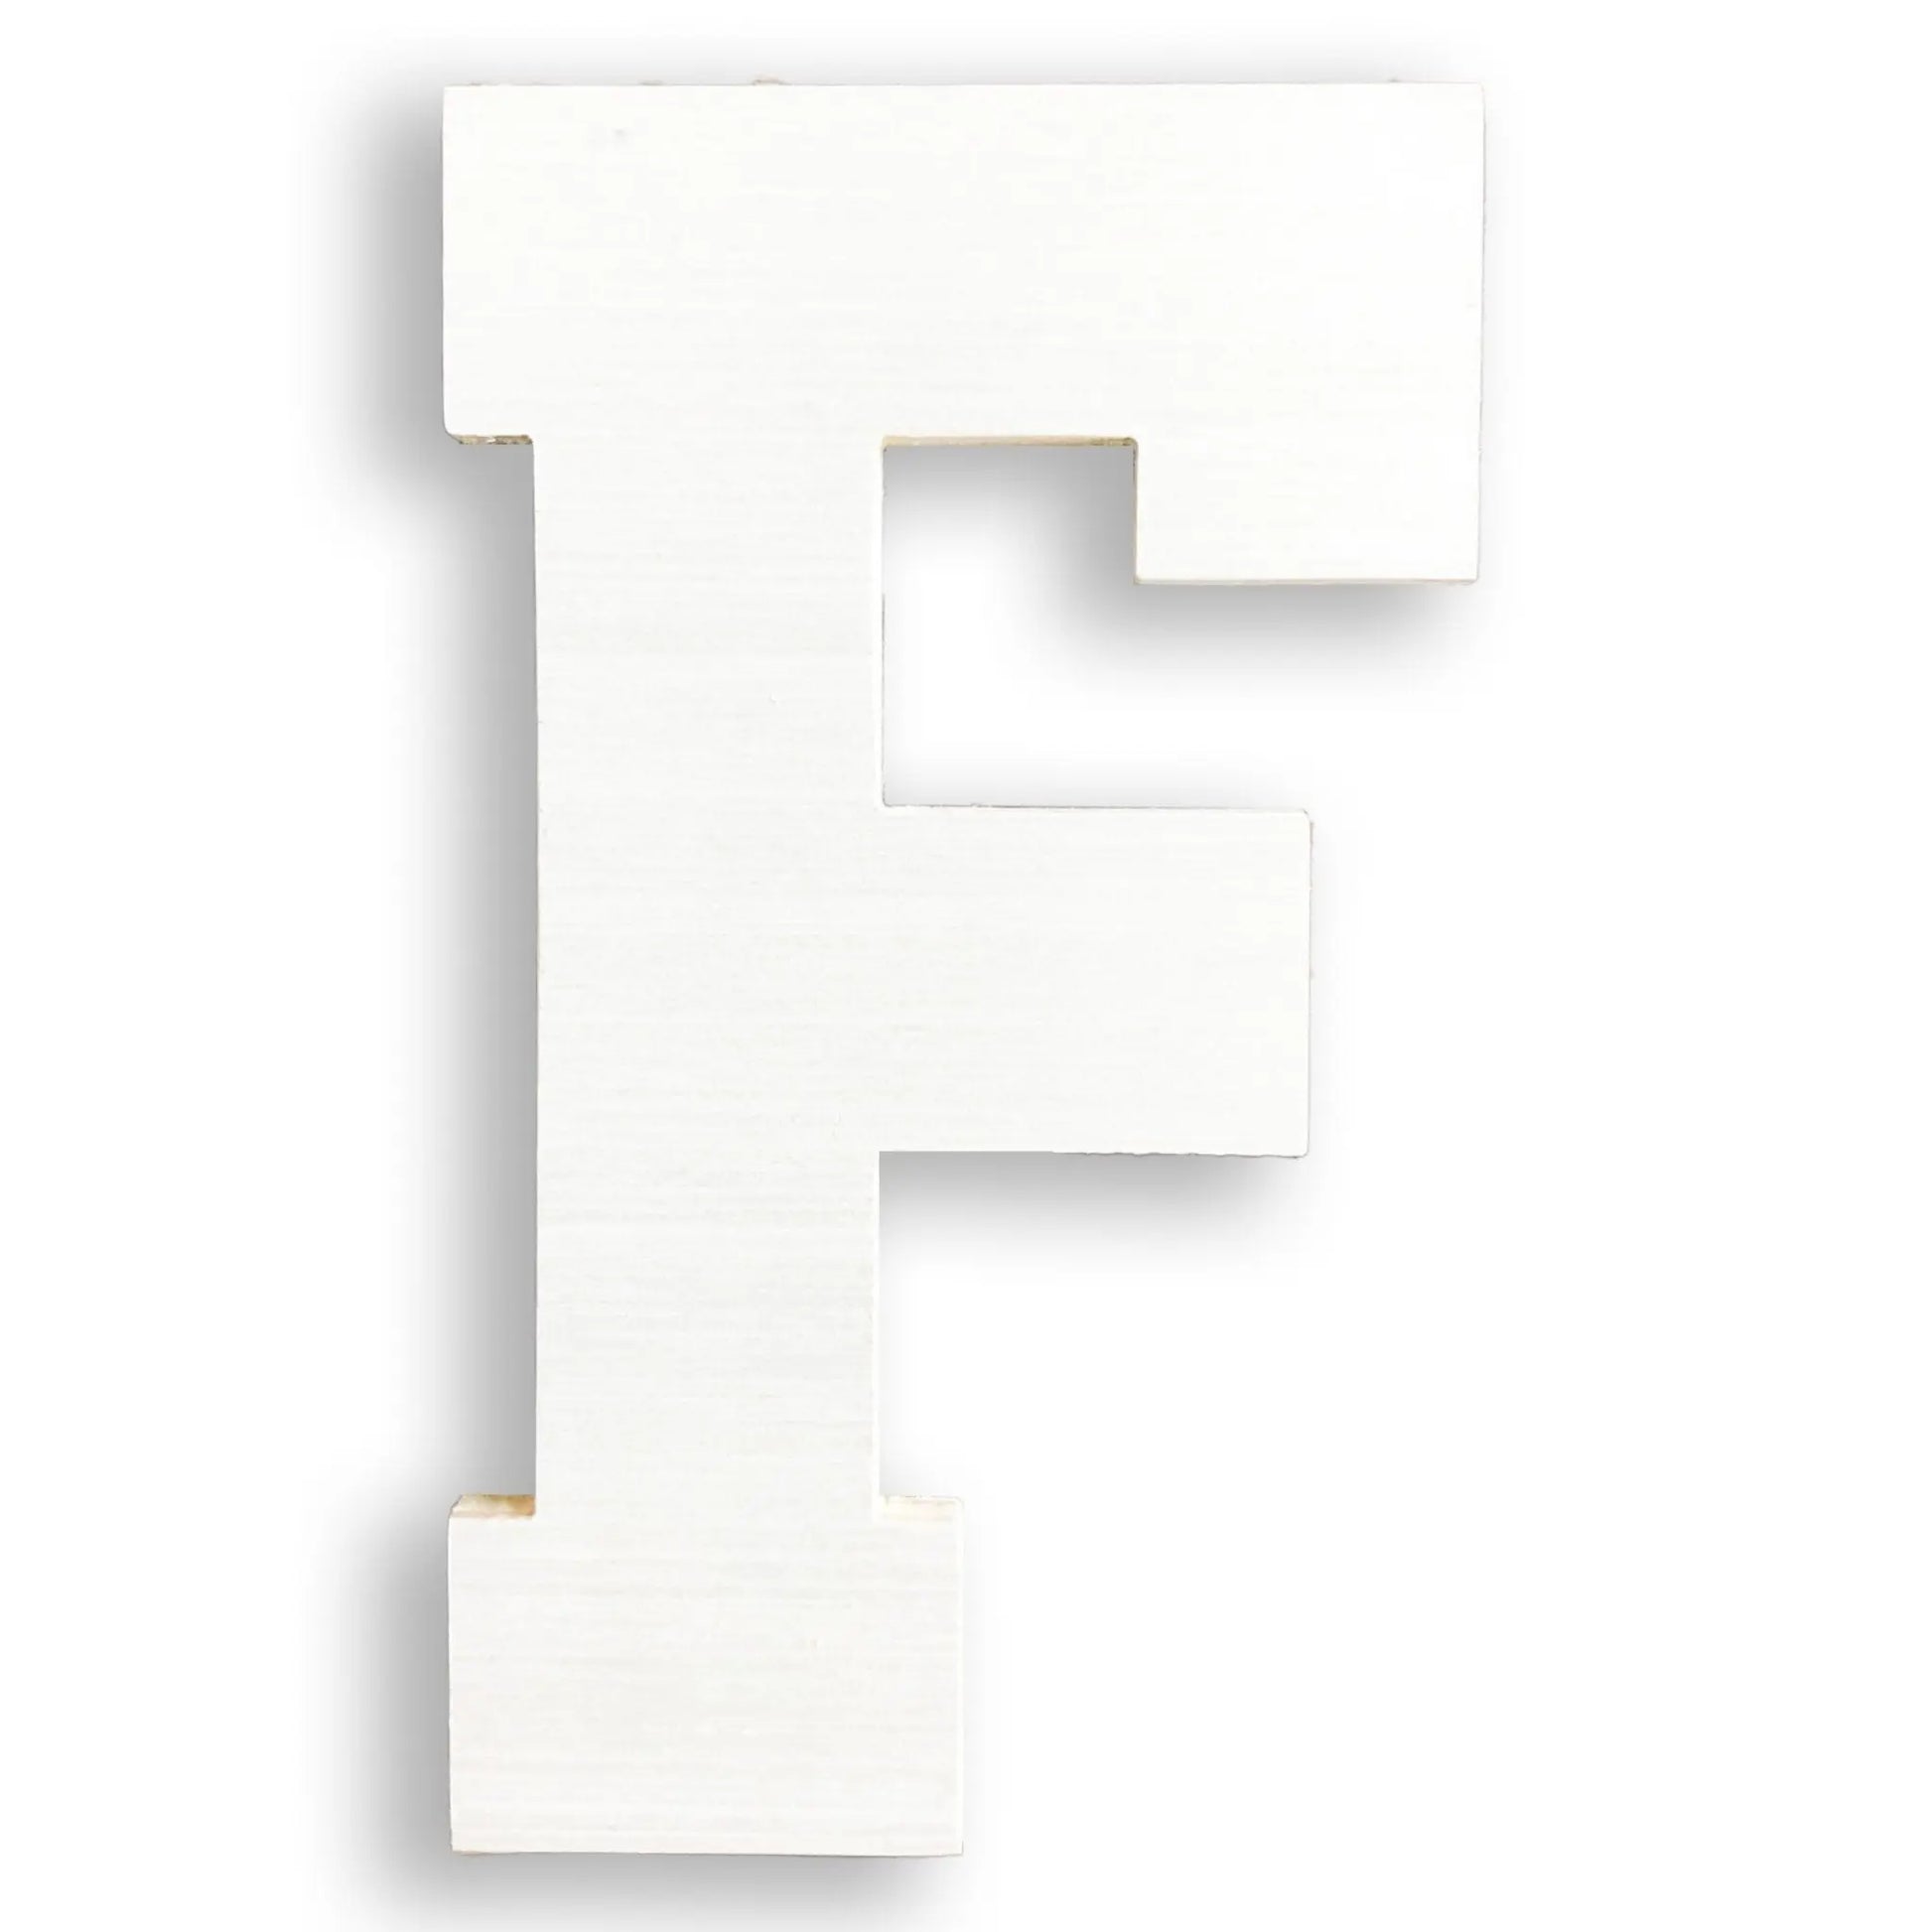 Wooden Letter M 12 inch, Unfinished Large Wood Letters for Crafts